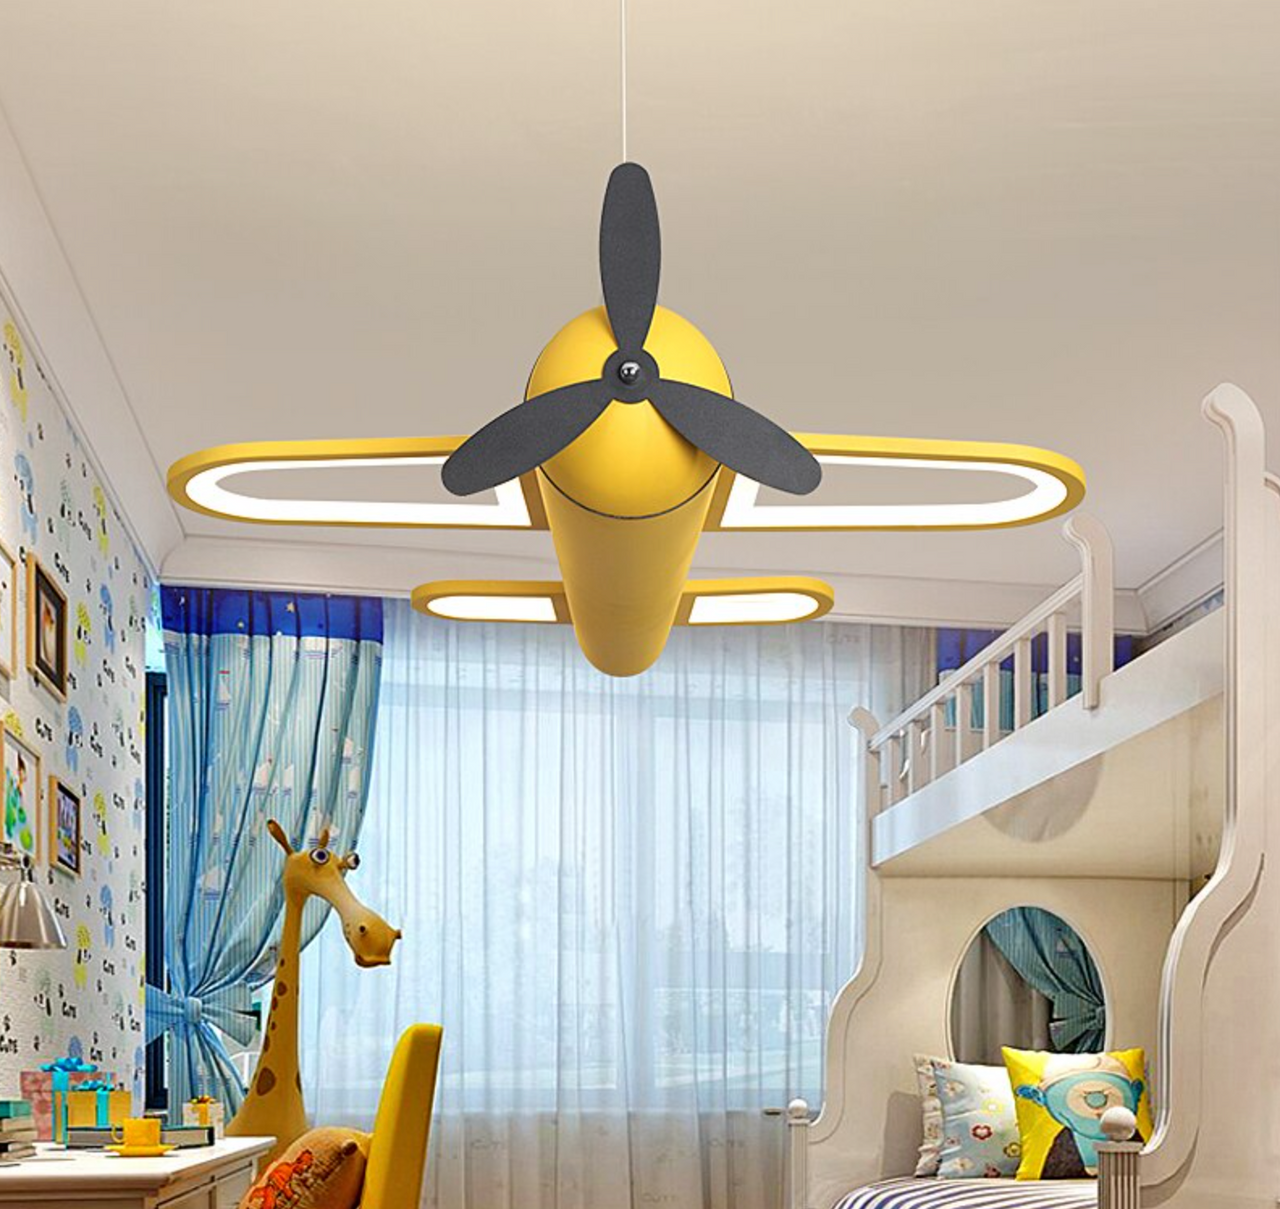 Modern LED Airplane Shape Super Cool Wall Lamps